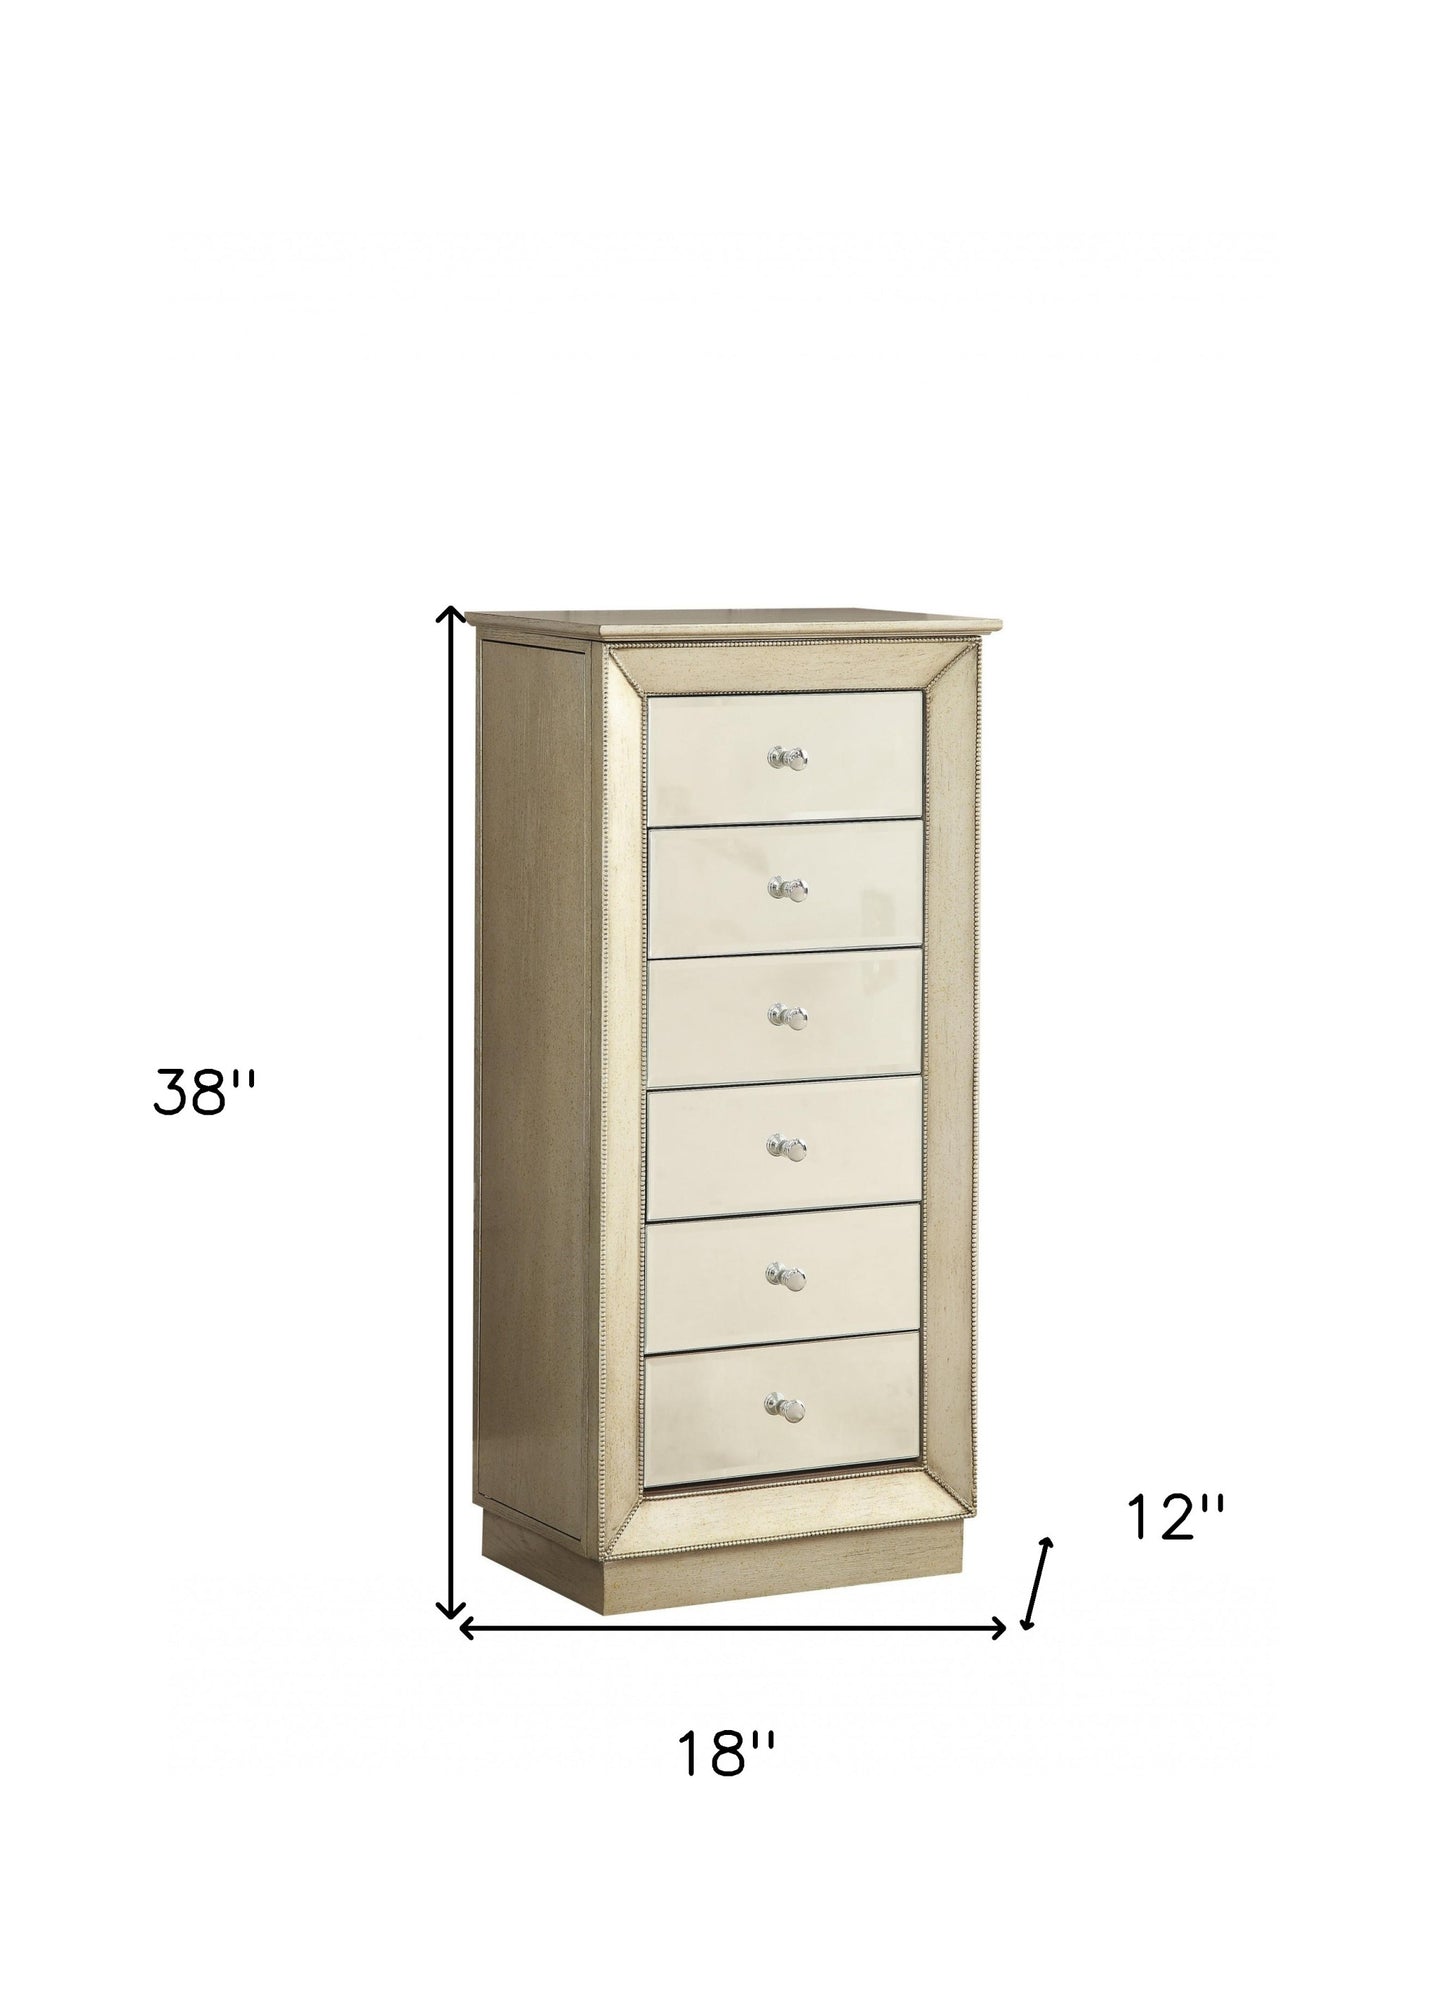 38" White Six Drawer Wood and Mirrored Glass Jewelry Armoire